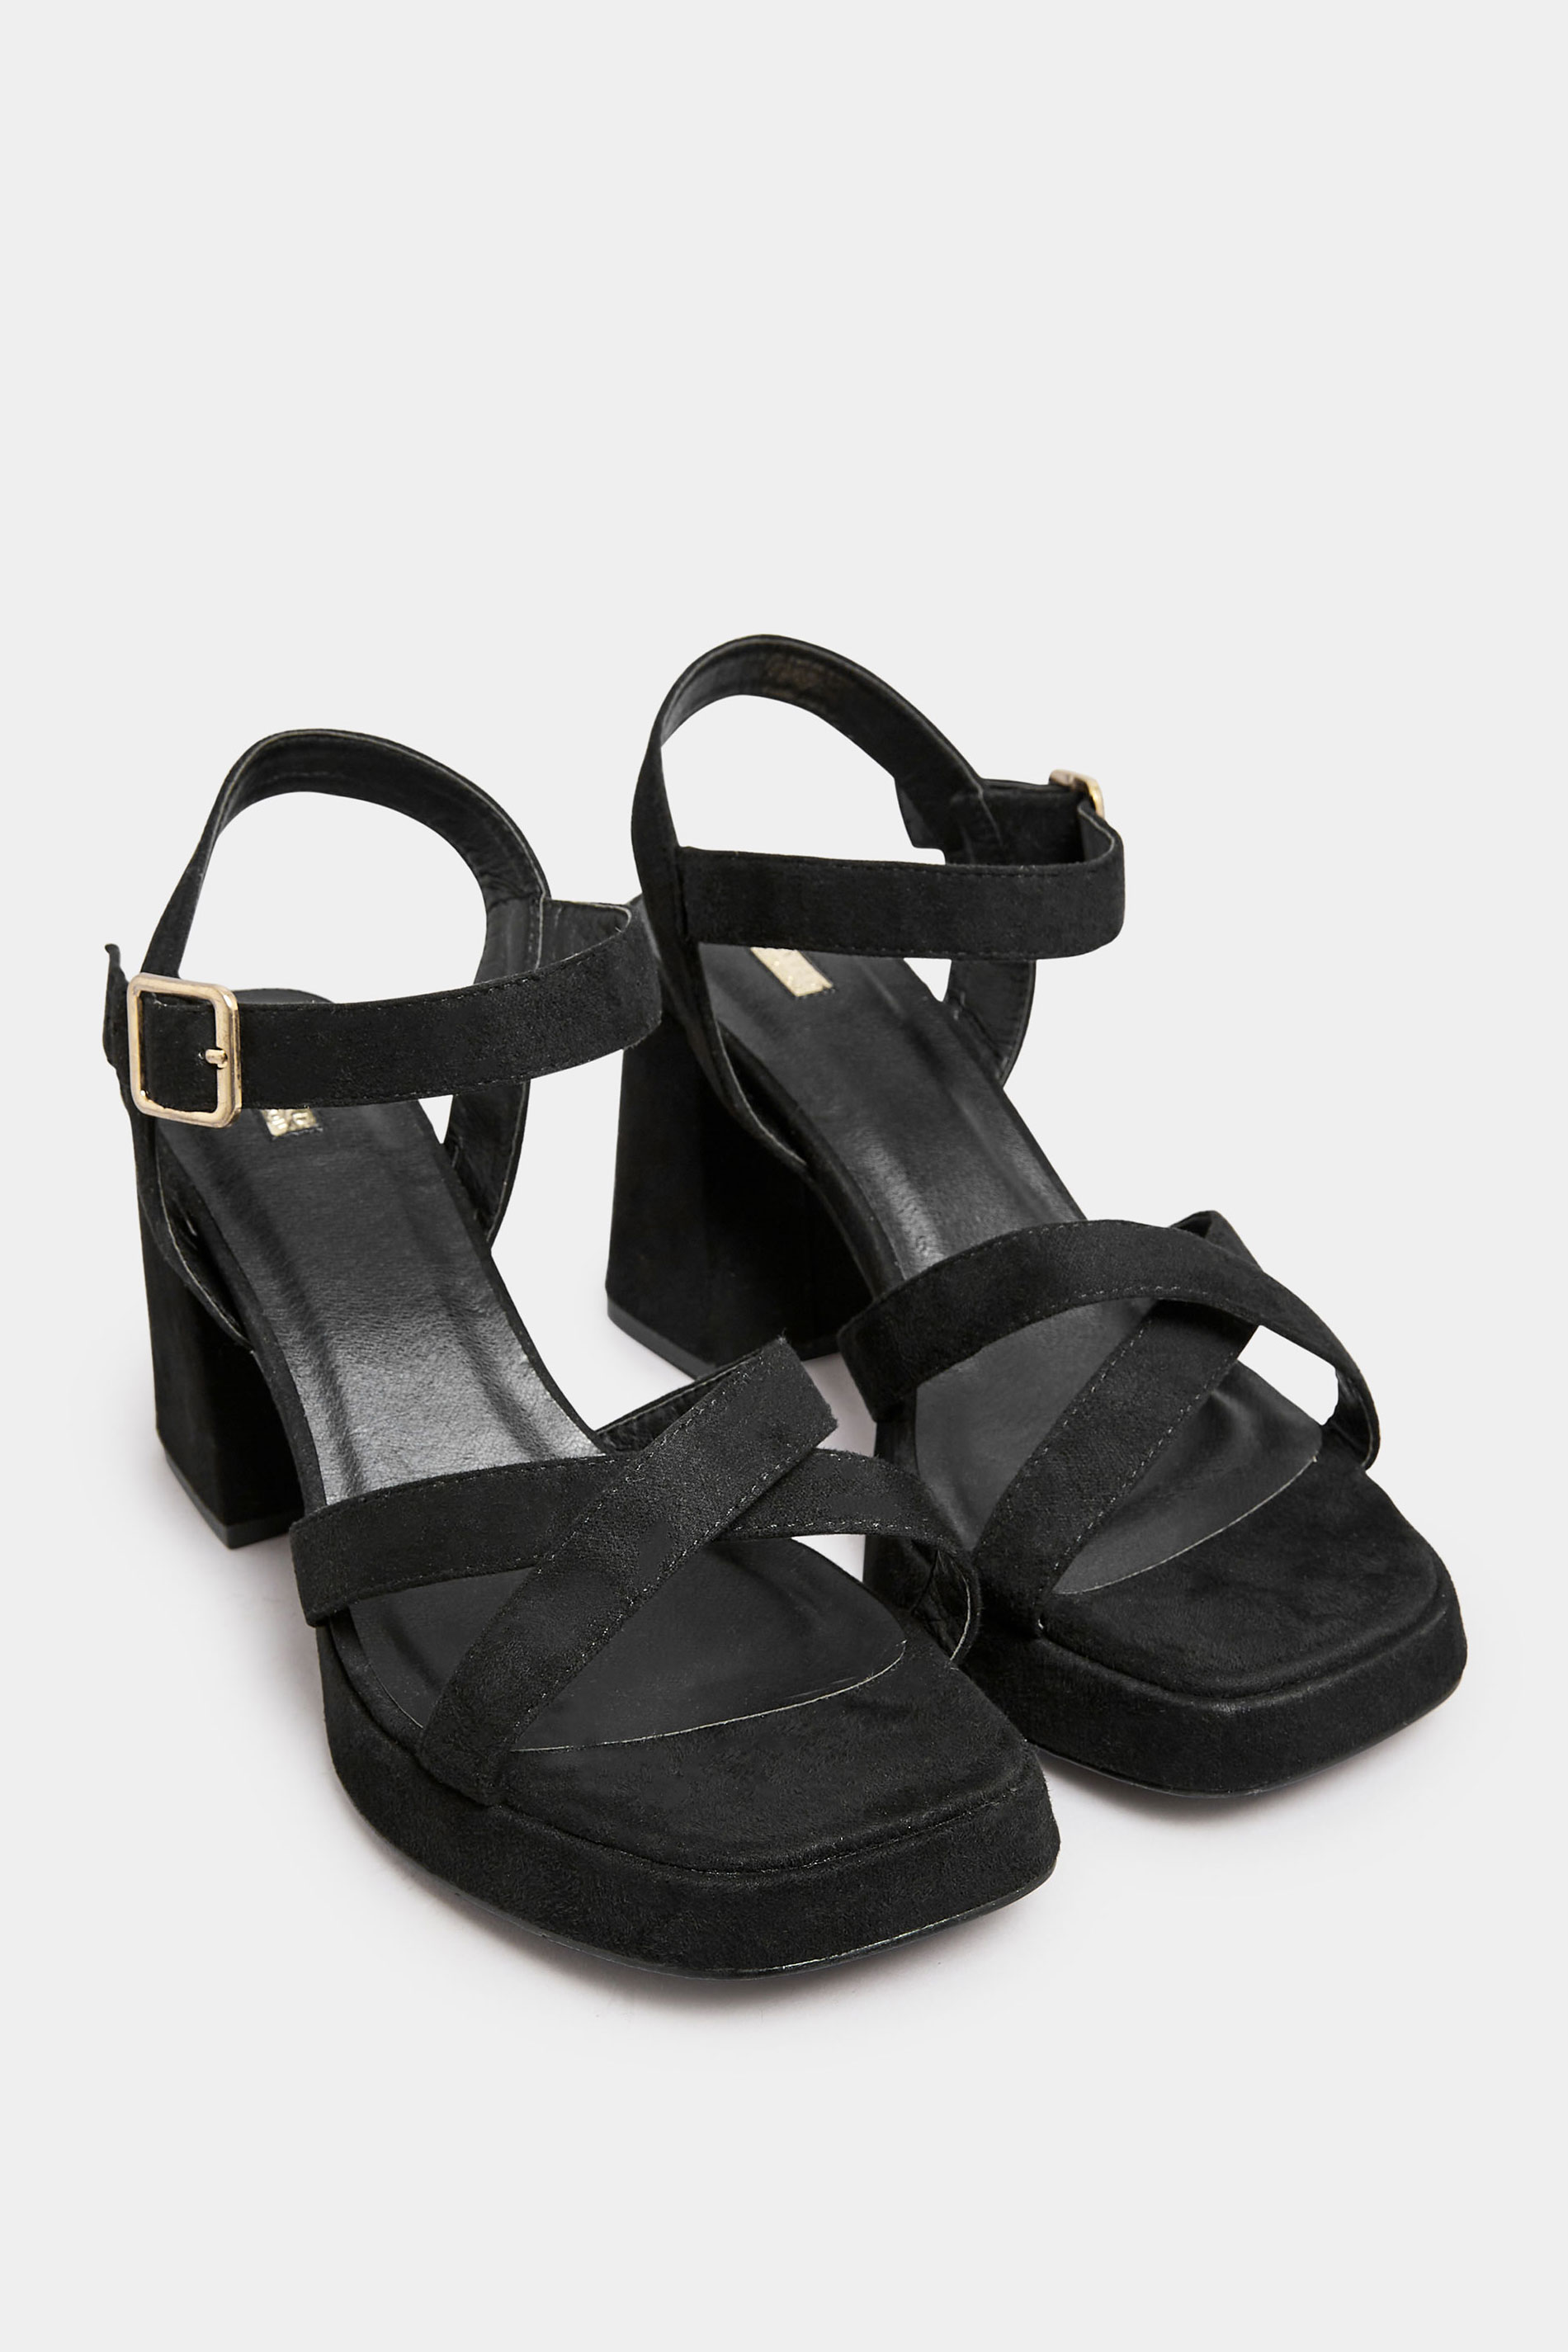 Black Platform Sandal Heels In Wide E Fit & Extra Wide EEE Fit | Yours Clothing  2